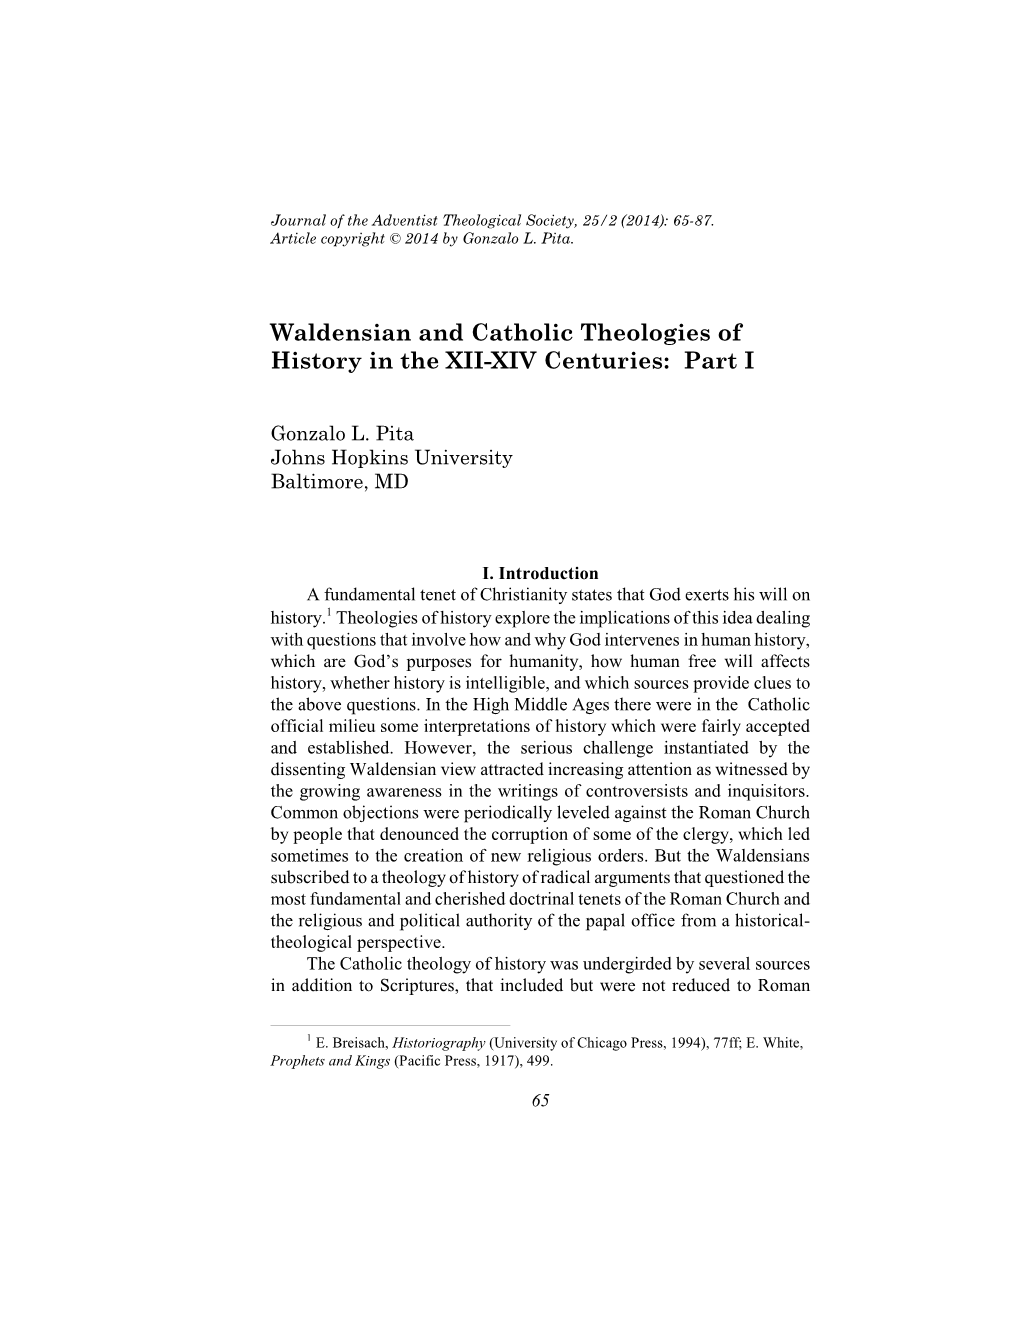 Waldensian and Catholic Theologies of History in the XII-XIV Centuries: Part I